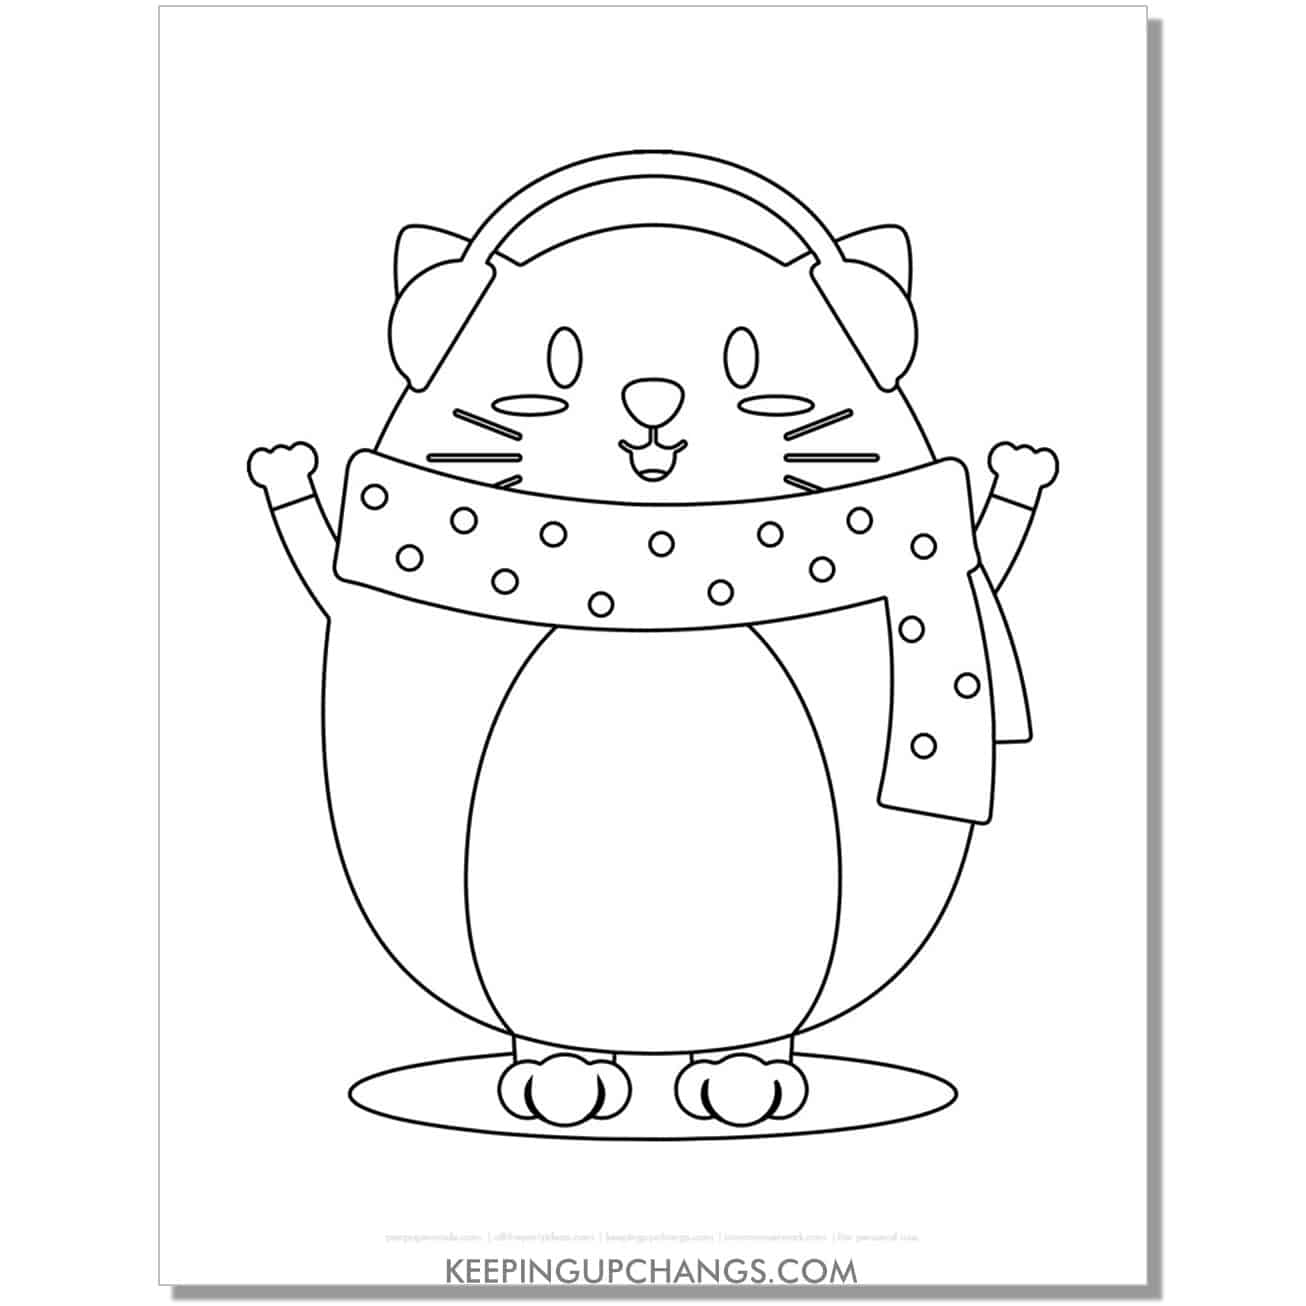 free winter christmas cat with ear muffs, scarf coloring page.